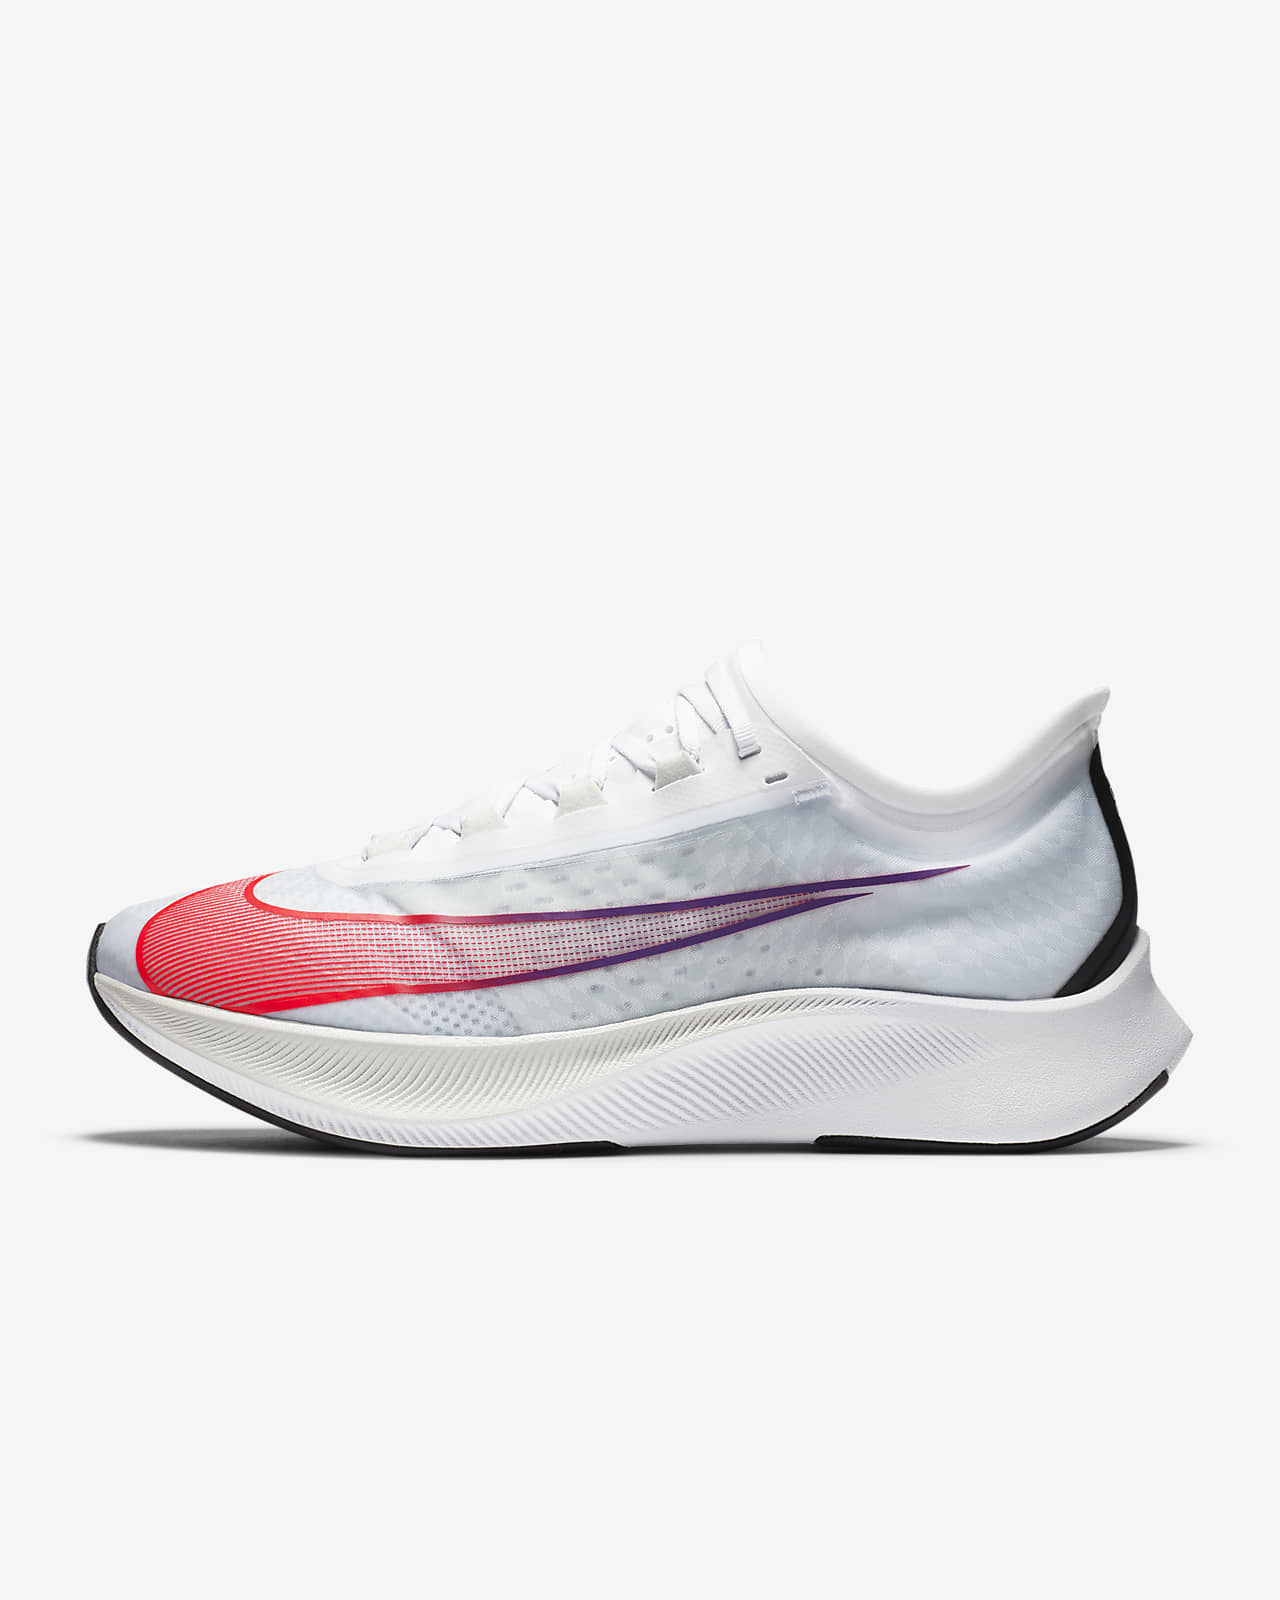 nike zoom fly fk hombre